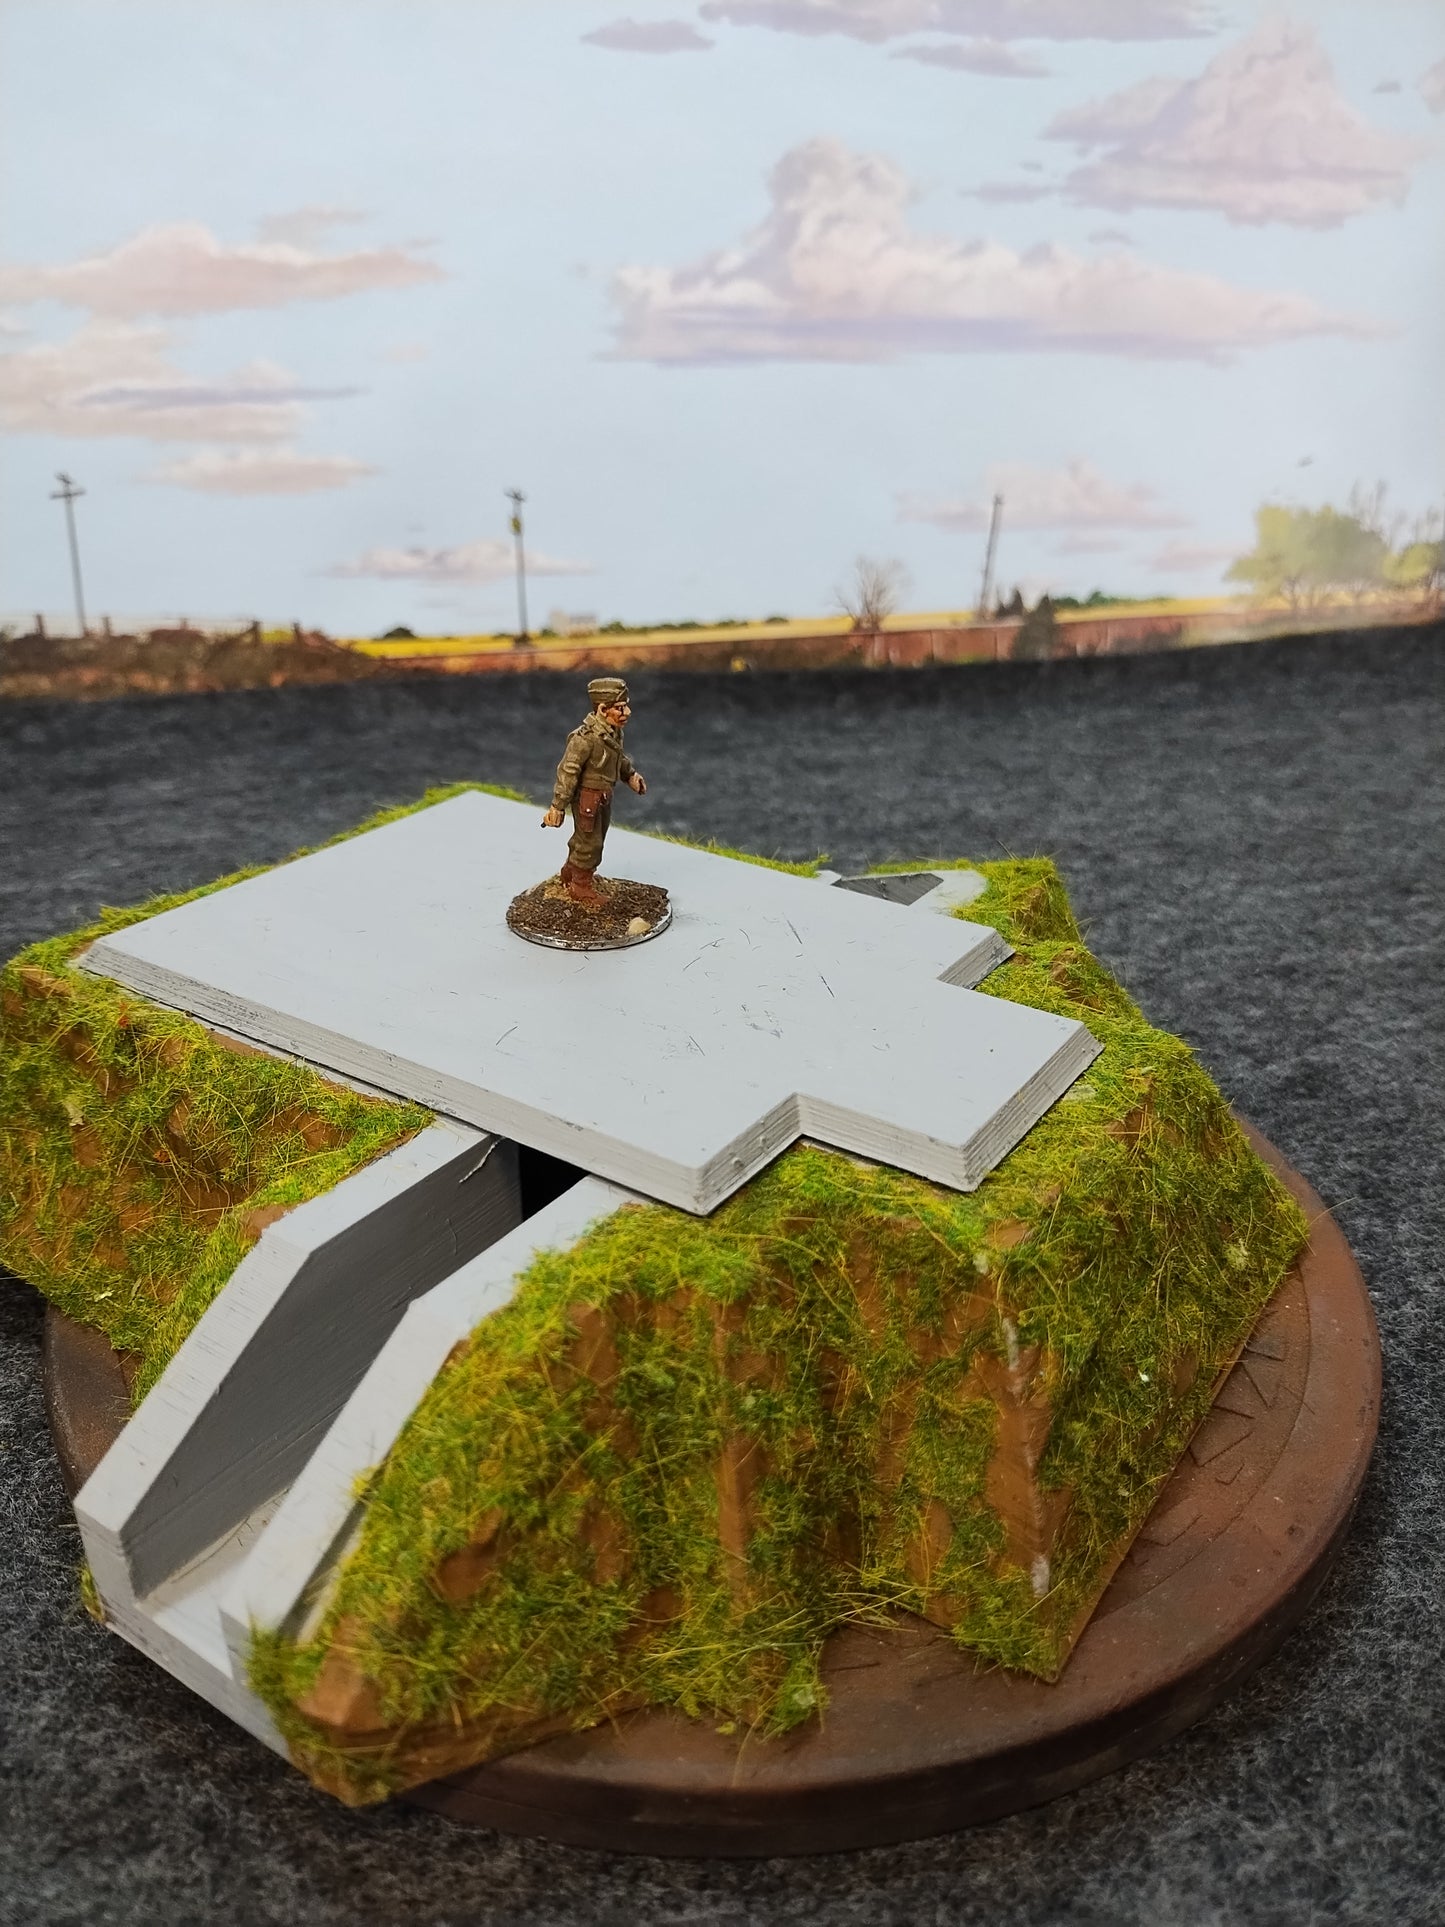 Command Bunker Grass - 28mm/Painted